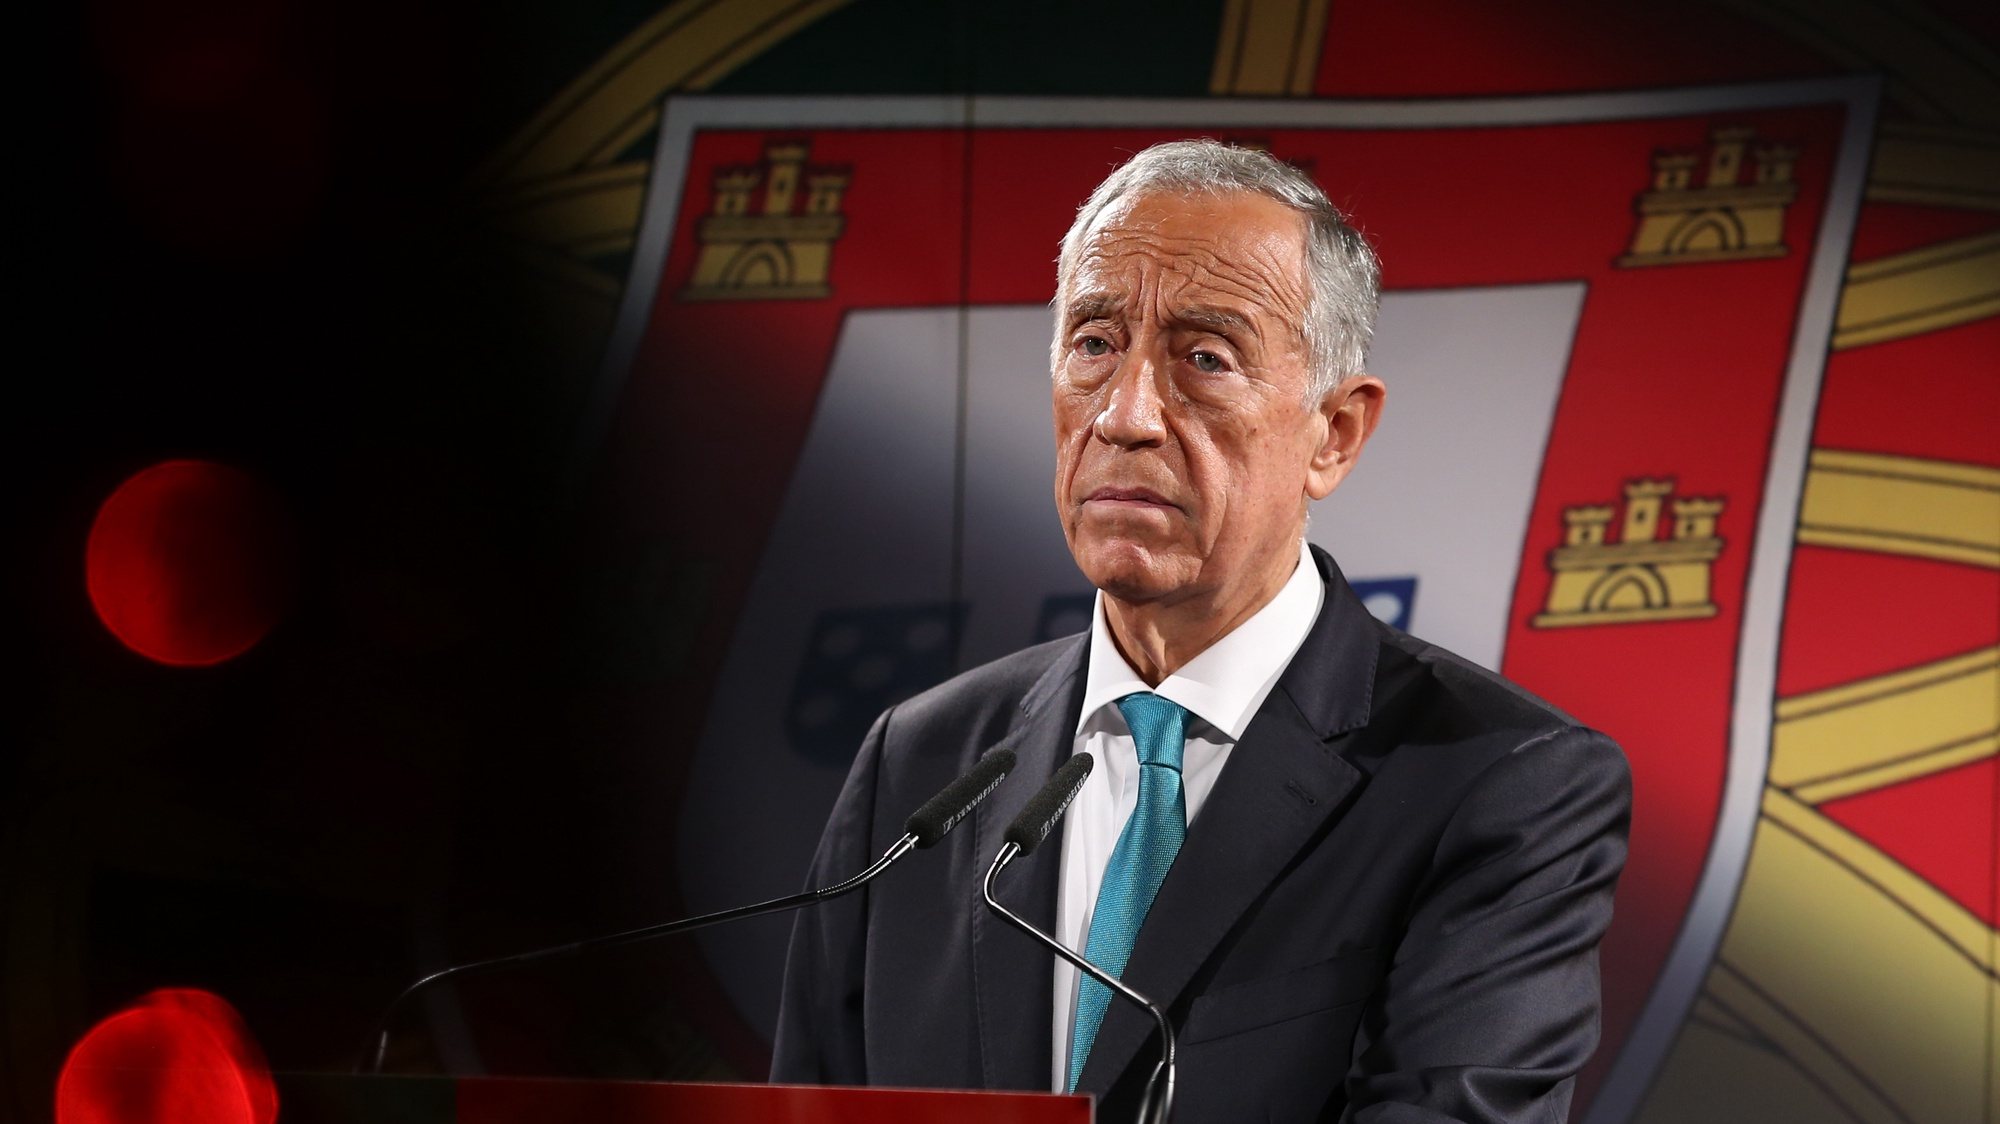 epa08868797 Portugal&#039;s President Marcelo Rebelo de Sousa, during the announcement of his decision to  run again for Portugal&#039;s Head of State in the elections of 24 January 2021, in Lisbon, Portugal, 07 December 2020. Almost 72 years old, on 12 December, Marcelo Rebelo de Sousa was elected President of the Republic in the first round of elections on 24 January 2016, with 52% of the vote.  EPA/MANUEL DE ALMEIDA / POOL